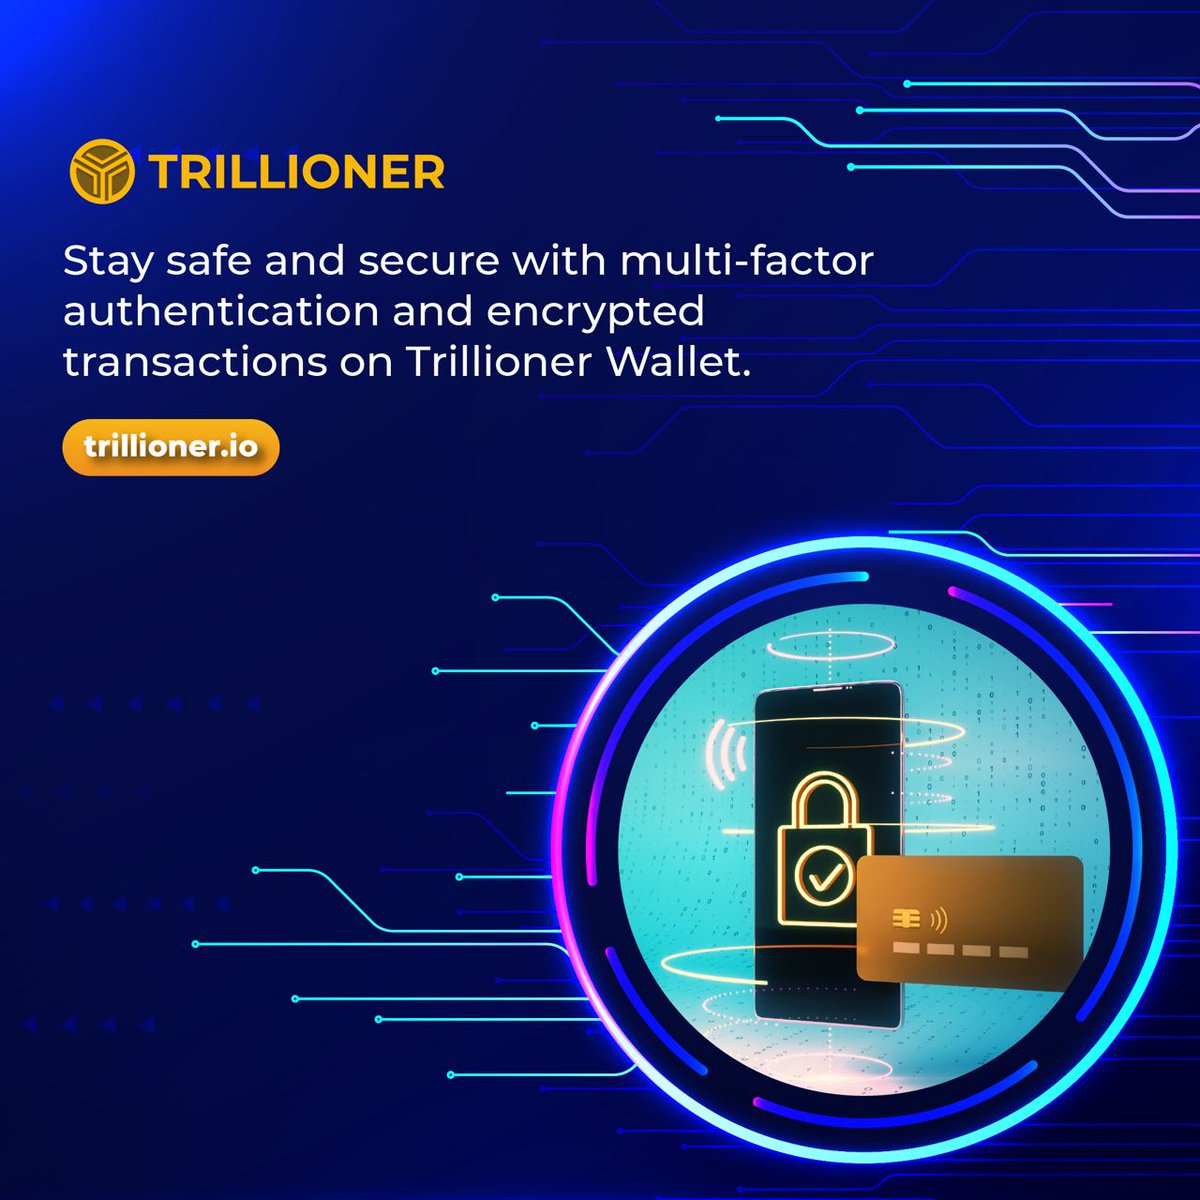 Stay safe and secure with multi-factor authentication and encrypted transactions on Trillioner Wallet.

#TLC #Trillioner #cryptocurrency #cryptonews #cryptotrading #Blockchain #metaverse #blockchainnews #BlockchainInnovation